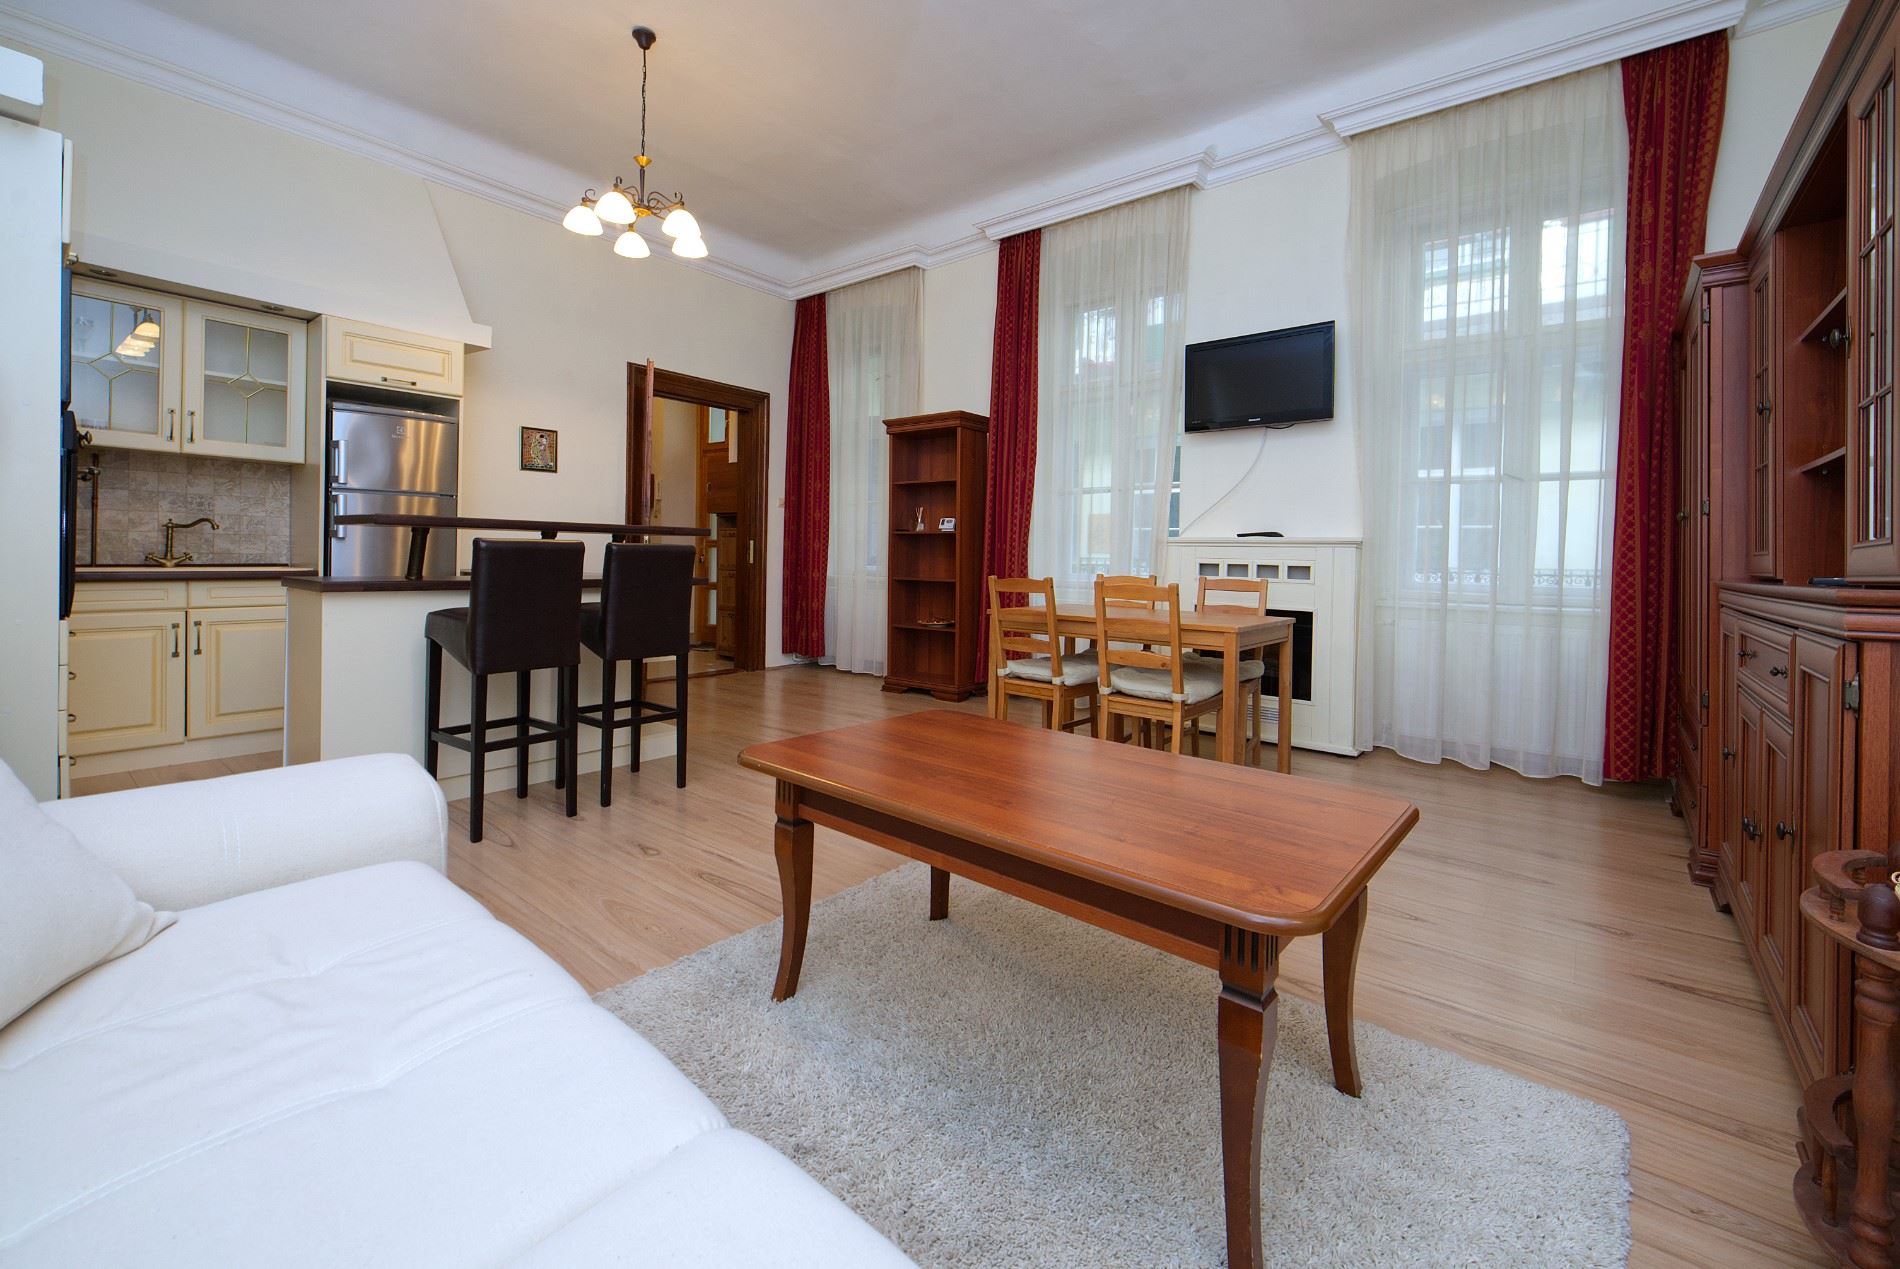 budapestrental-property-for-rent-long-term-spacious-large-1-bedroom-flat-for-rent-district-6-near-nyugati-main-tram6